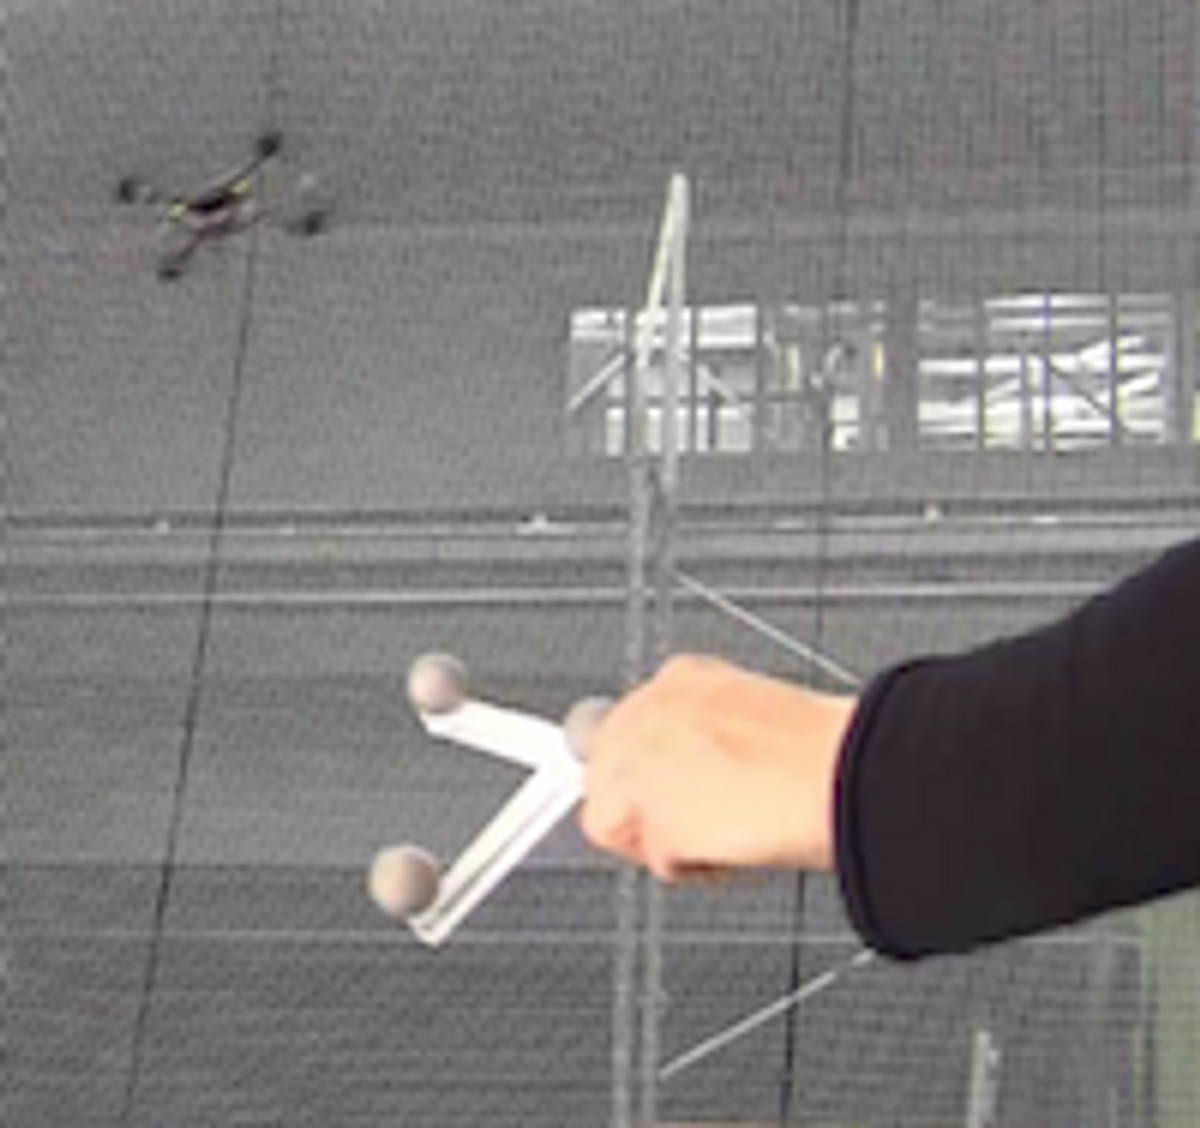 Controlling a Quadrotor Using Kinect